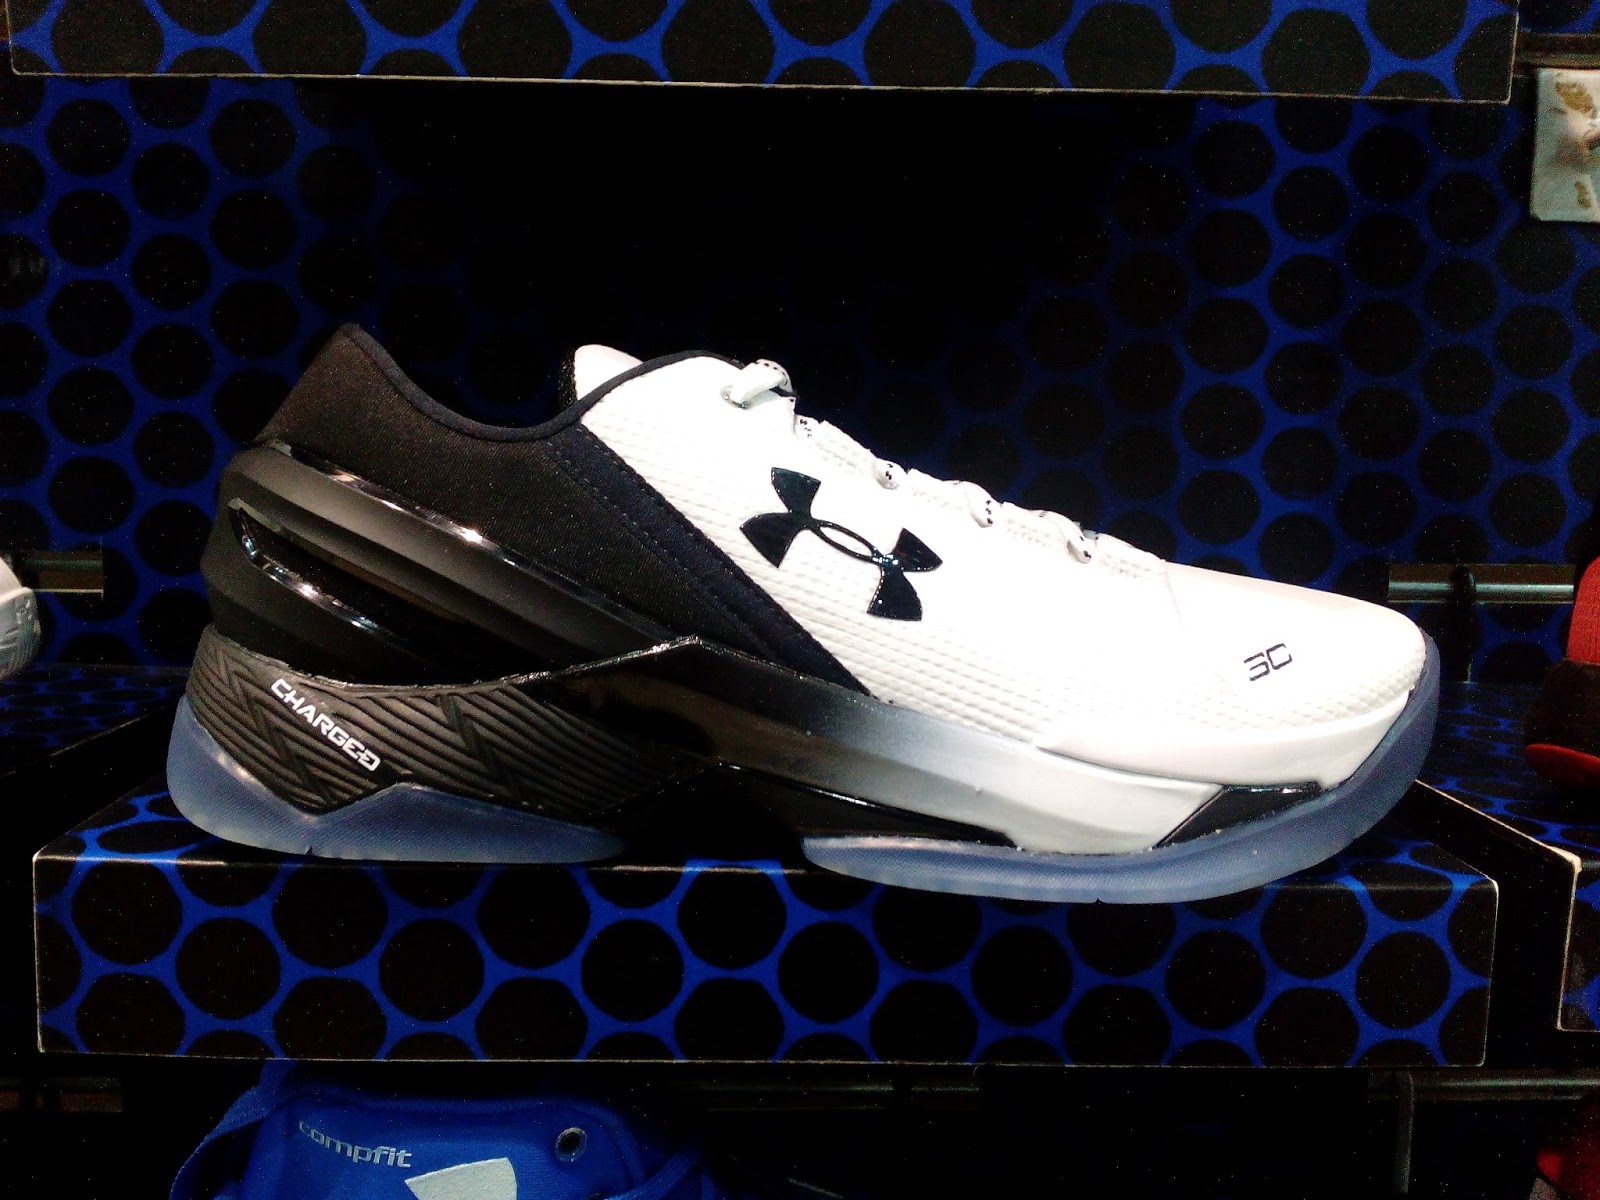 Searching for Curry 2 Low?